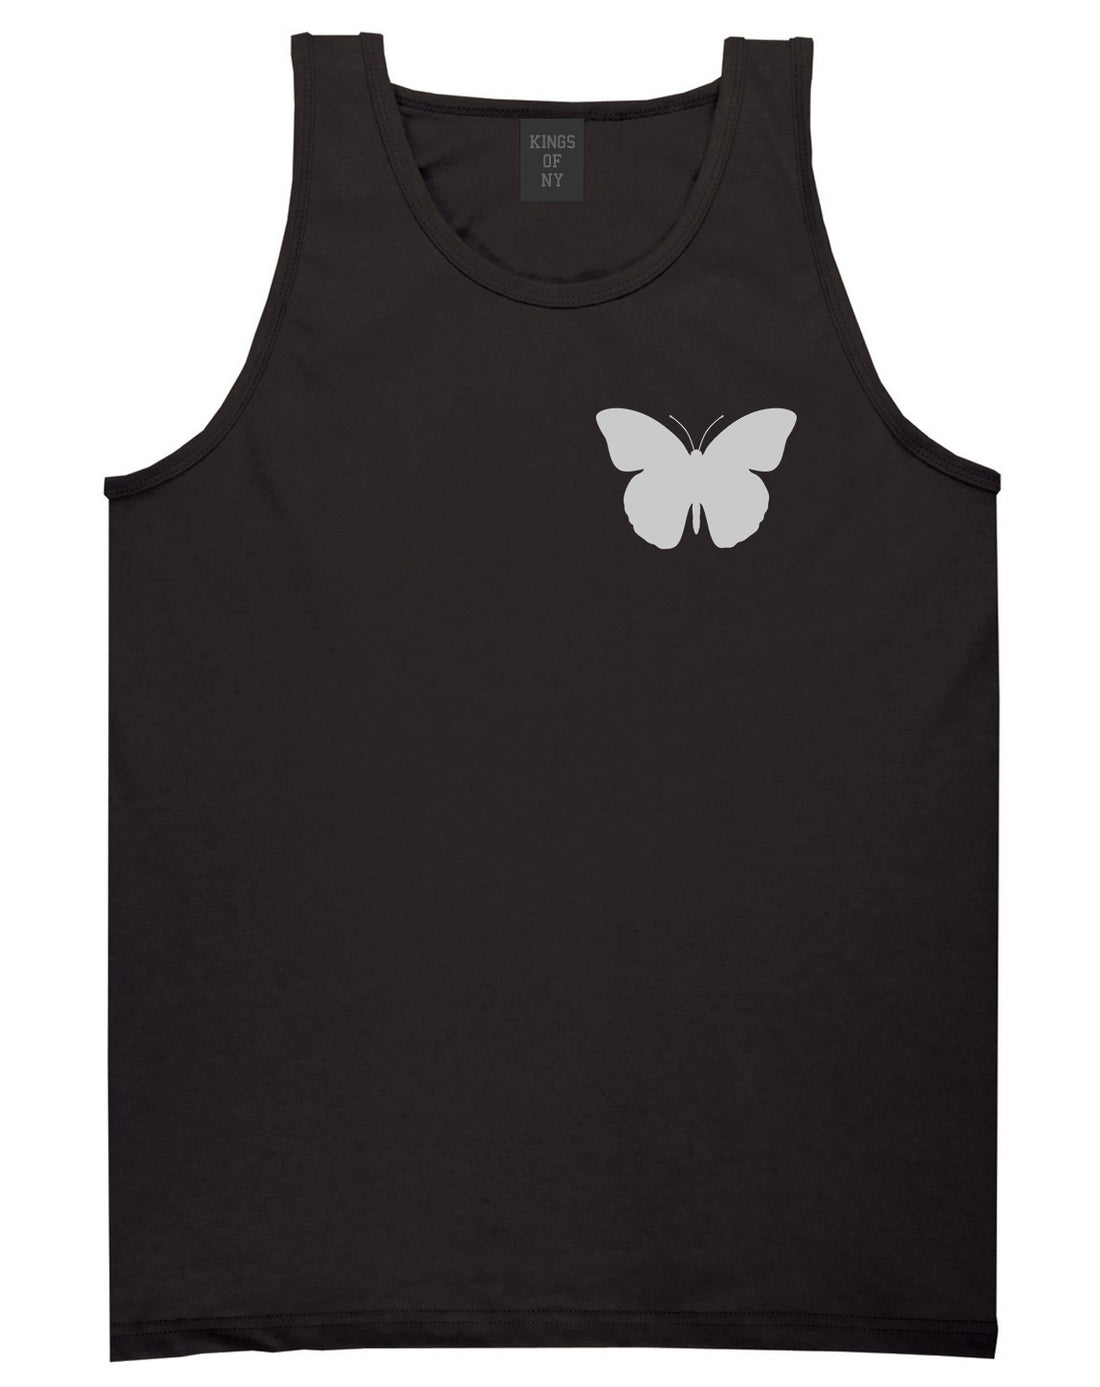 Butterfly Chest Black Tank Top Shirt by Kings Of NY